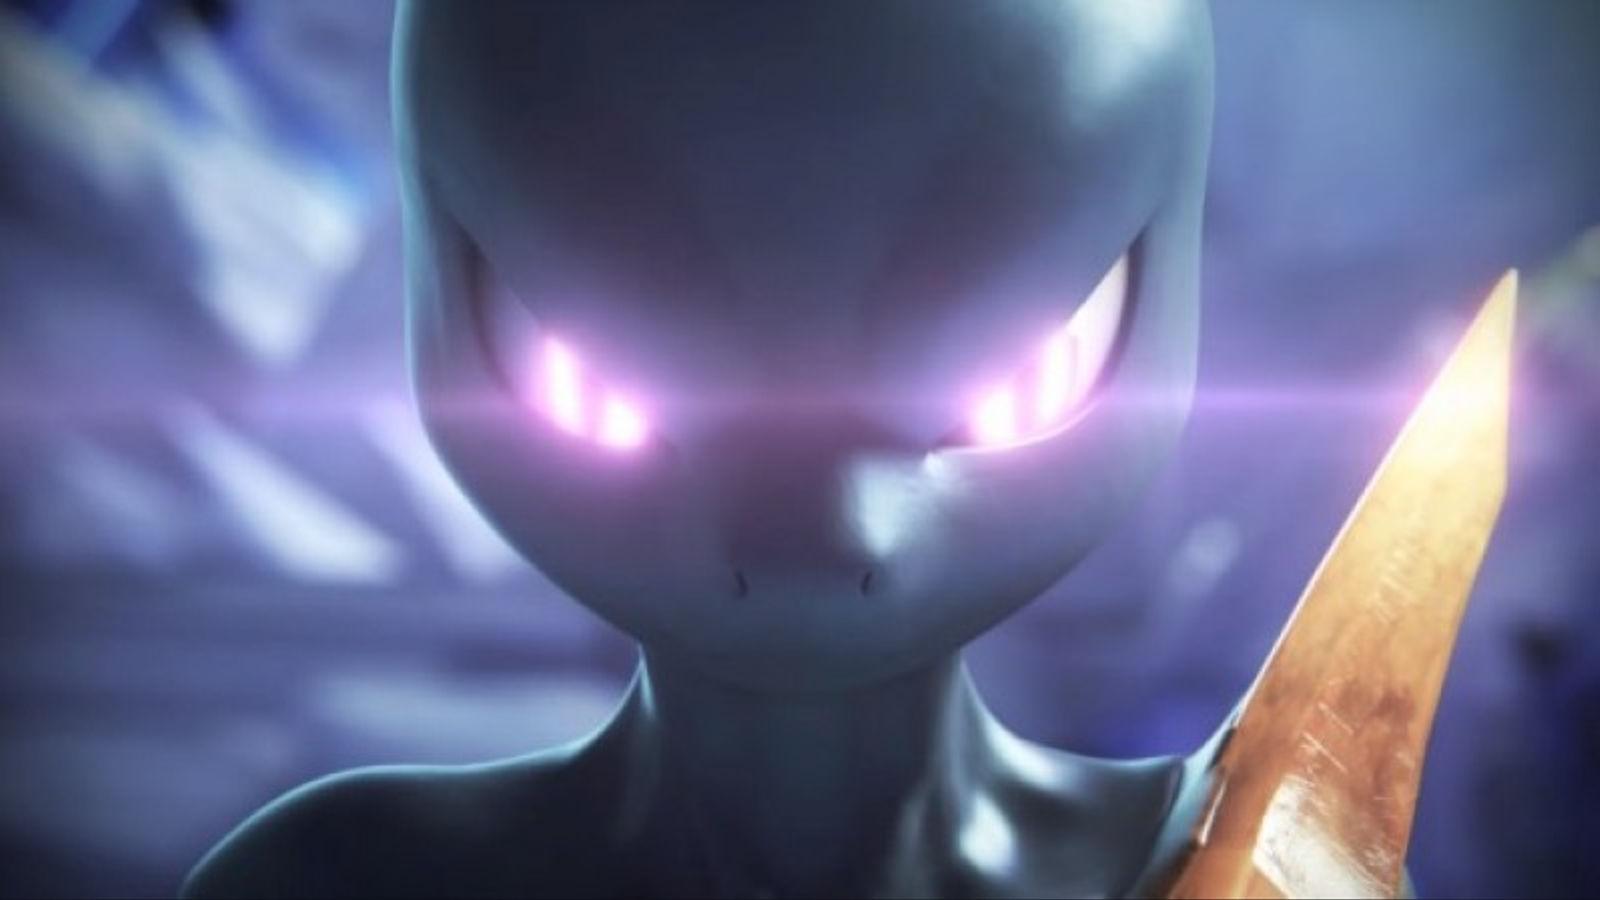 Mew and Mewtwo are coming to Pokémon Scarlet and Violet in